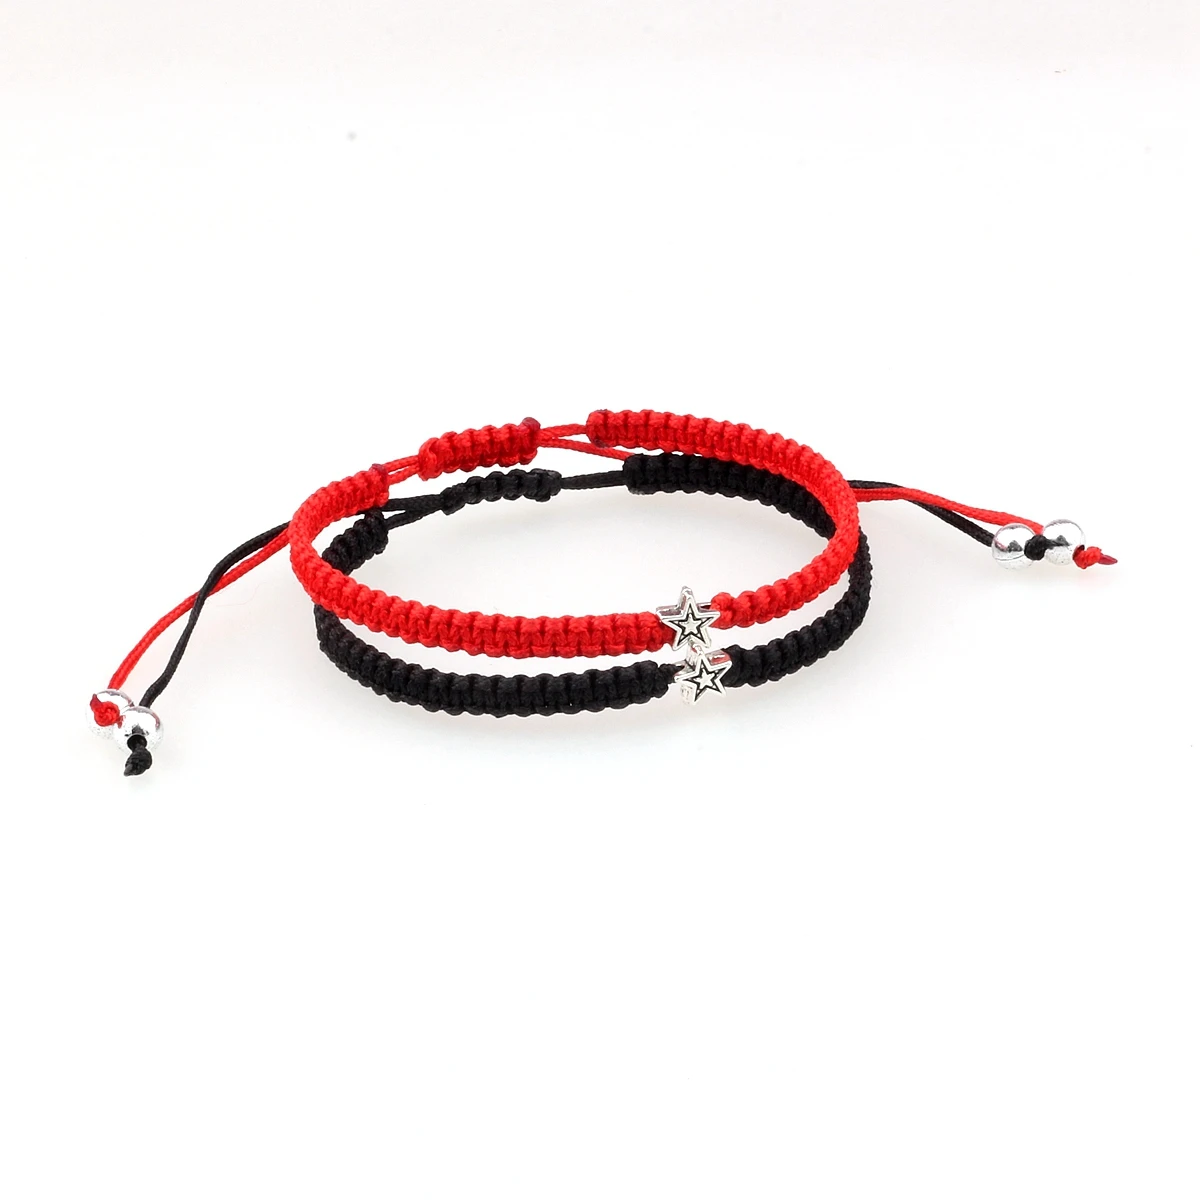 

1Pcs New Star Braided Bracelet Lucky Red Black Color Thread Couple Chain Handmade Prayer Bangles Pulsera Jewelry Gift For Friend